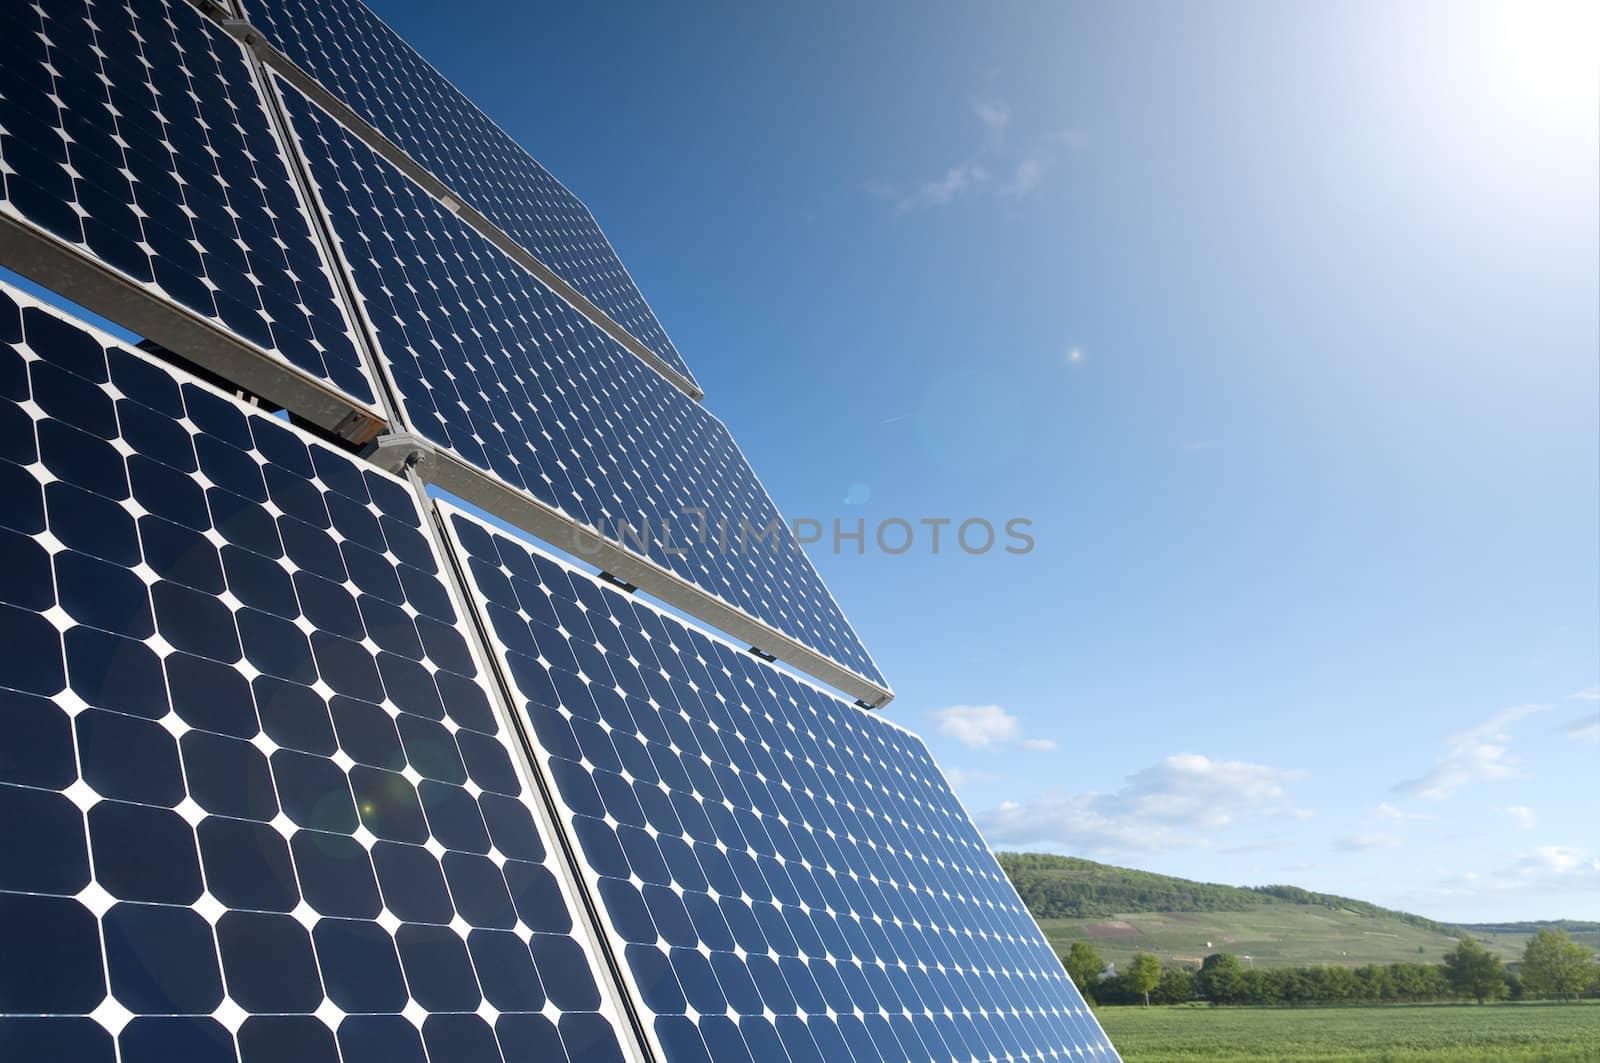 Solar Panel Against Blue Sky With Green Landscape